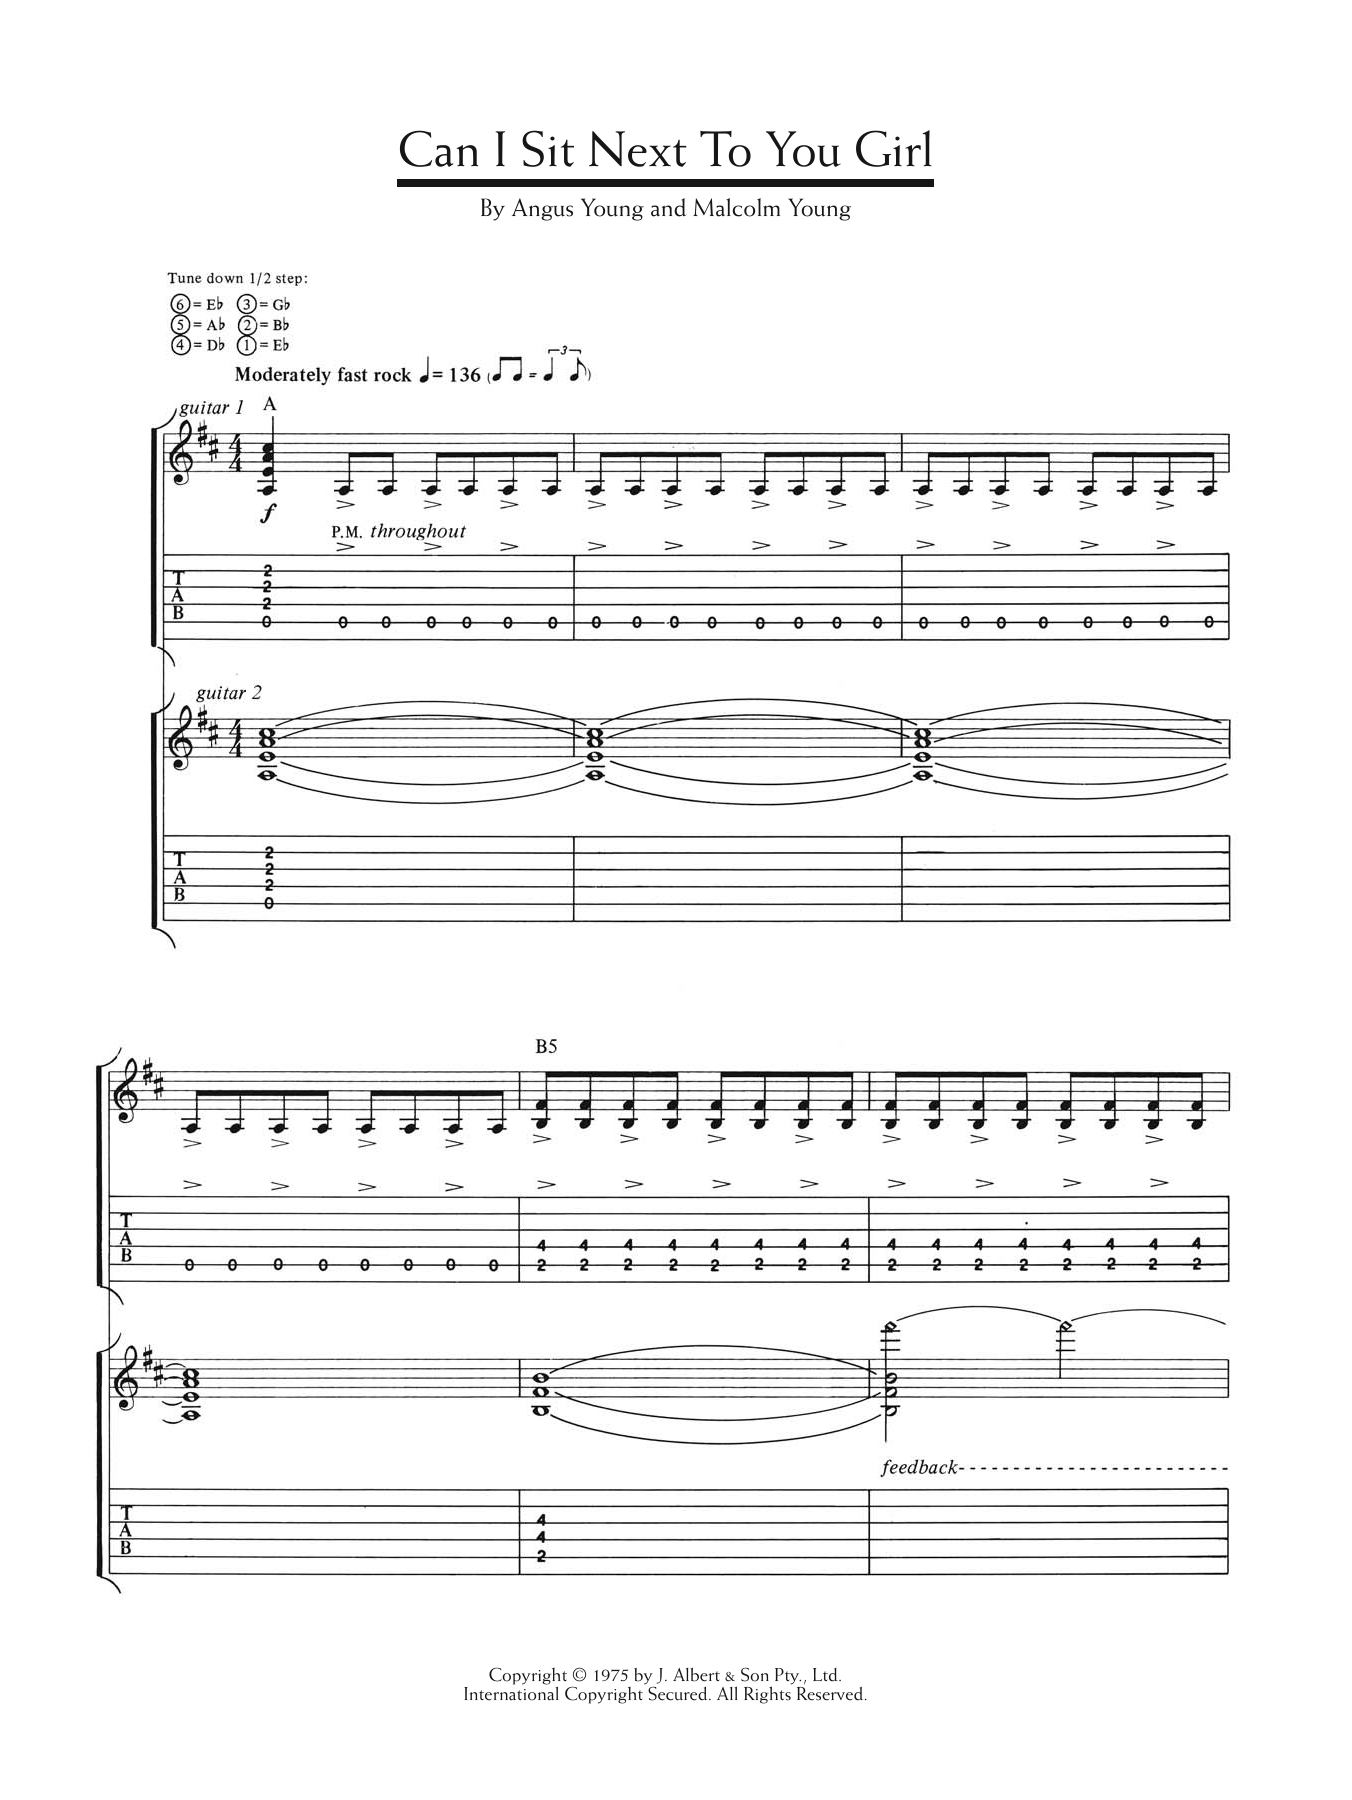 Download AC/DC Can I Sit Next To You Girl Sheet Music